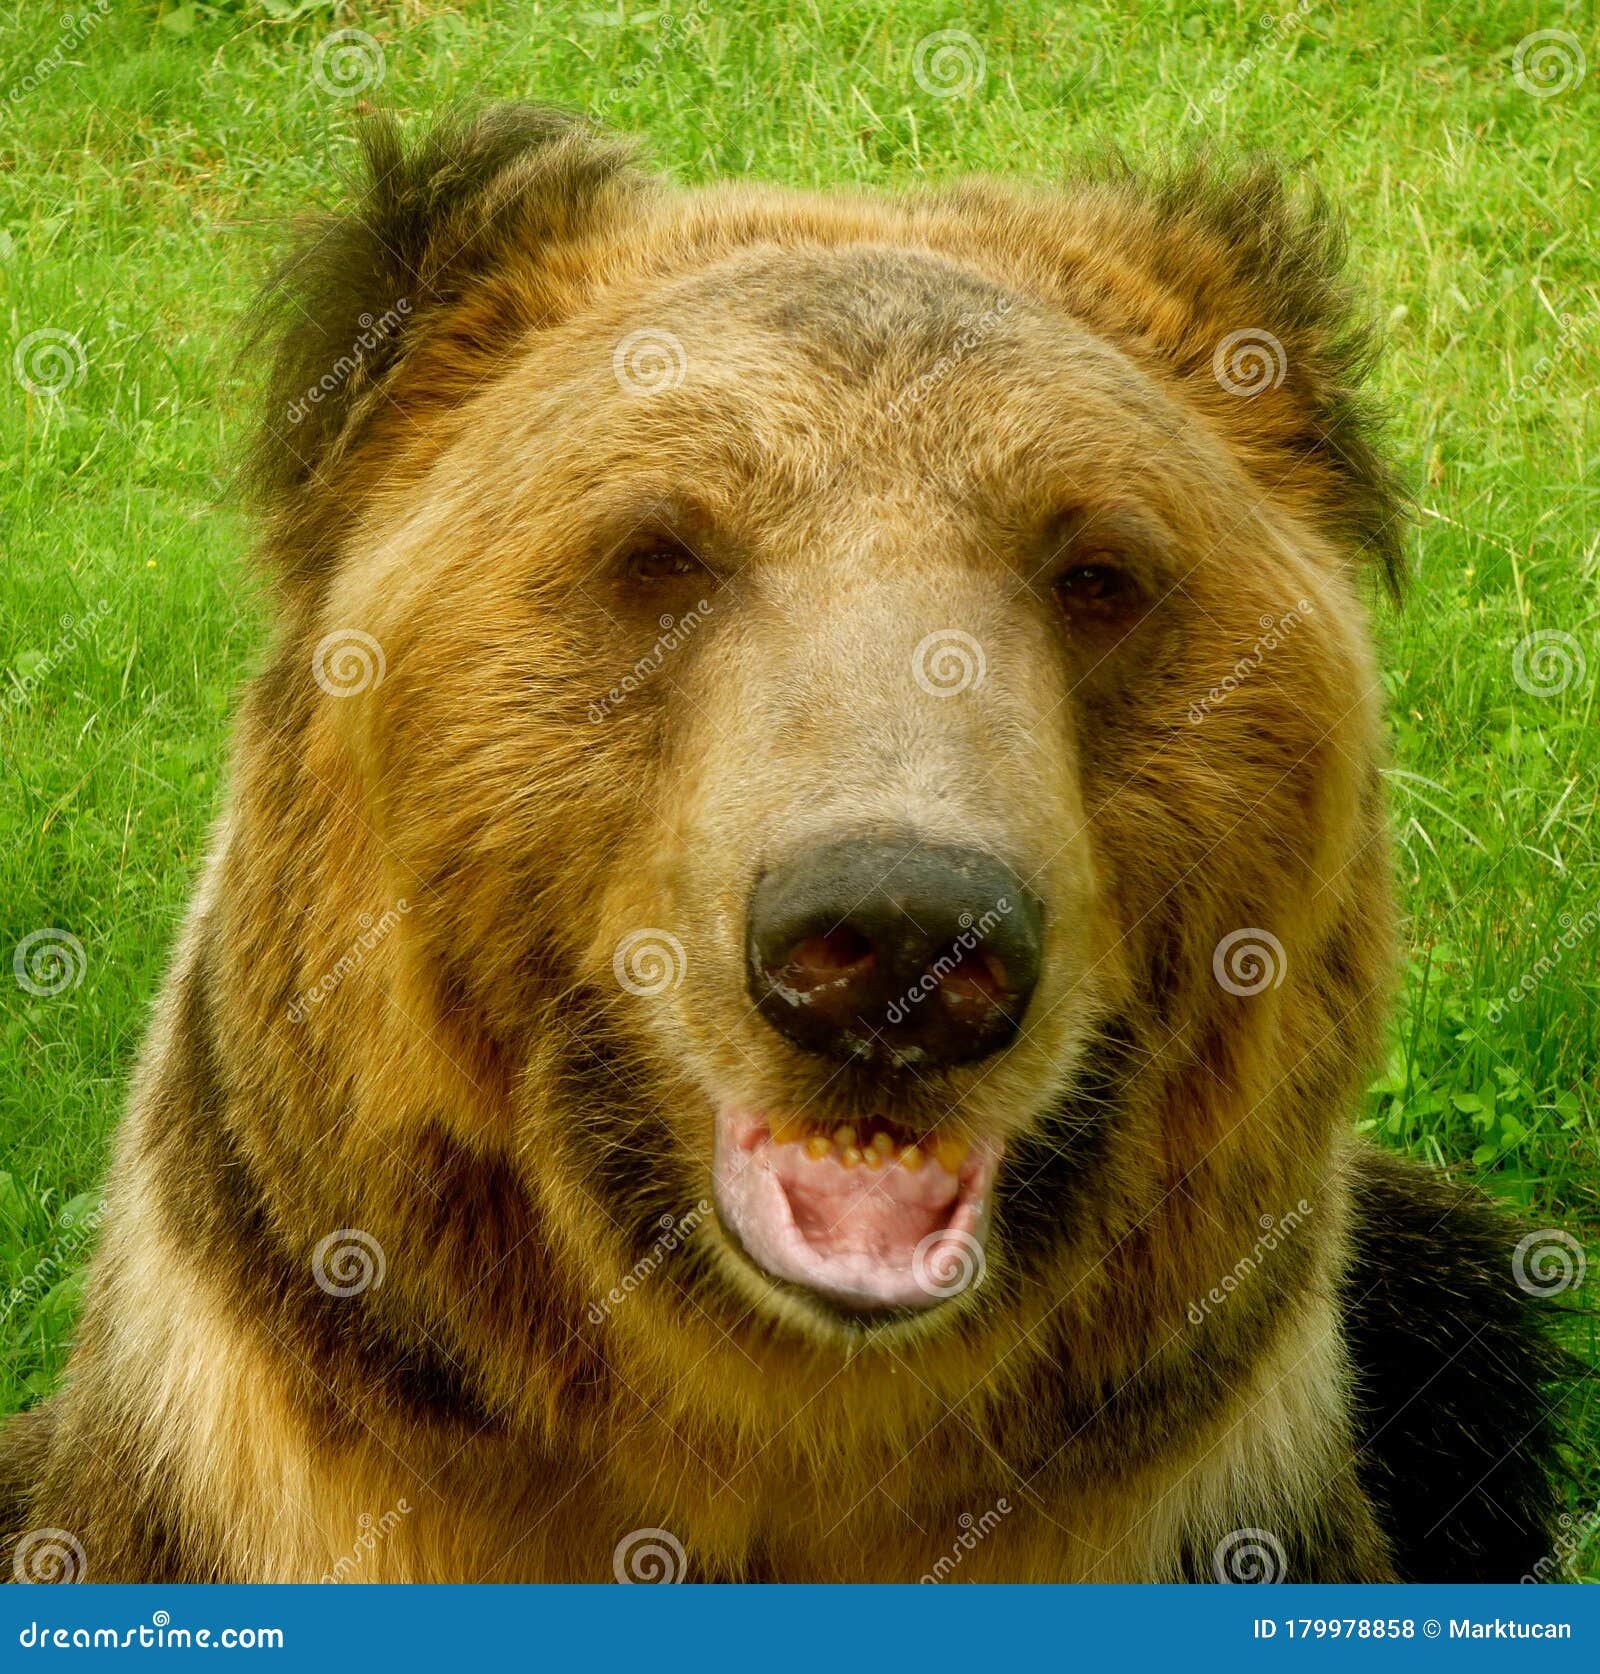 brown bear in the animals asia rescue centre near chengdu, china